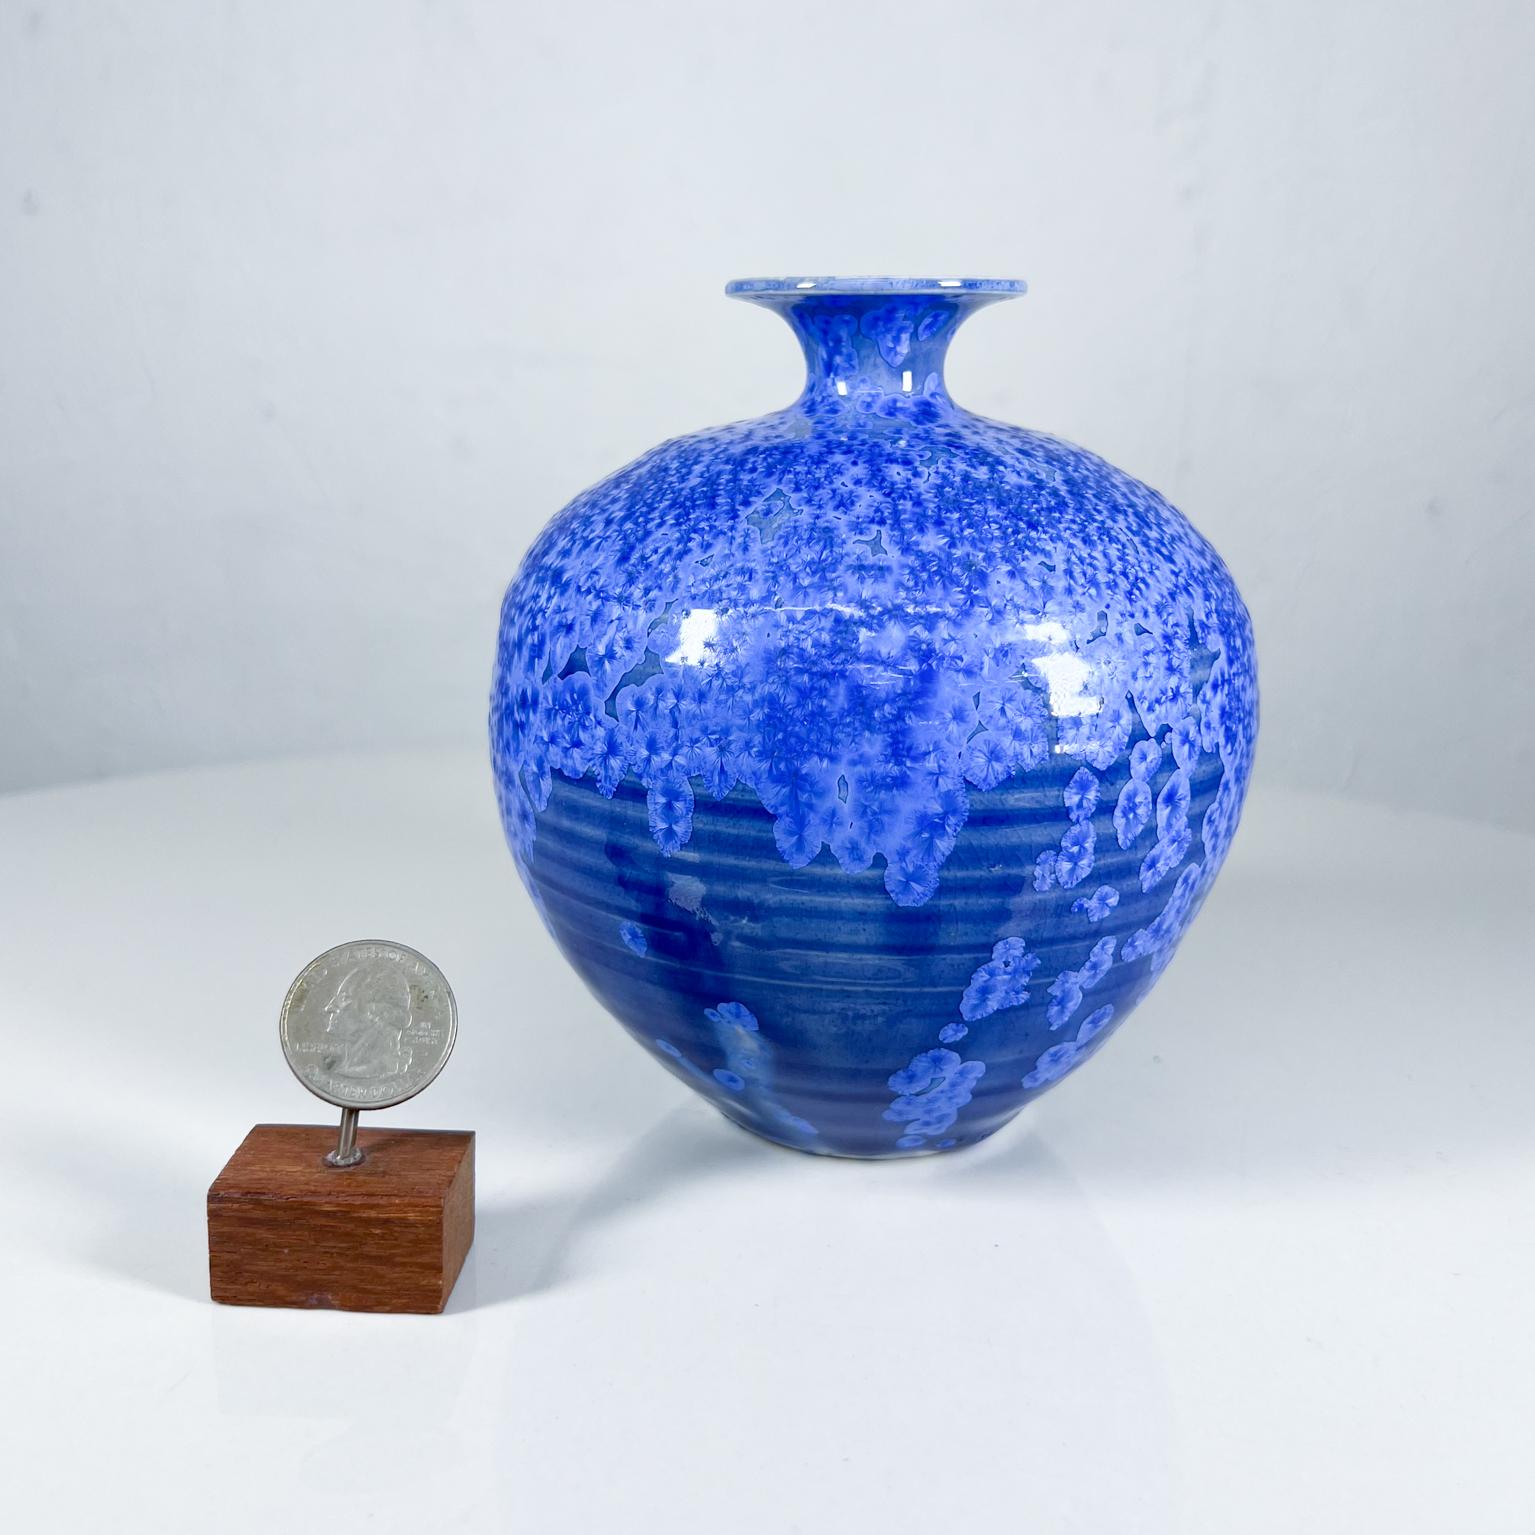 1960s Mid-Century Modern studio pottery small cobalt blue vase signed
PAL 811 inscription at the base
Measures: 5.75 height x 5 diameter
Preowned original vintage condition
See images provided.



